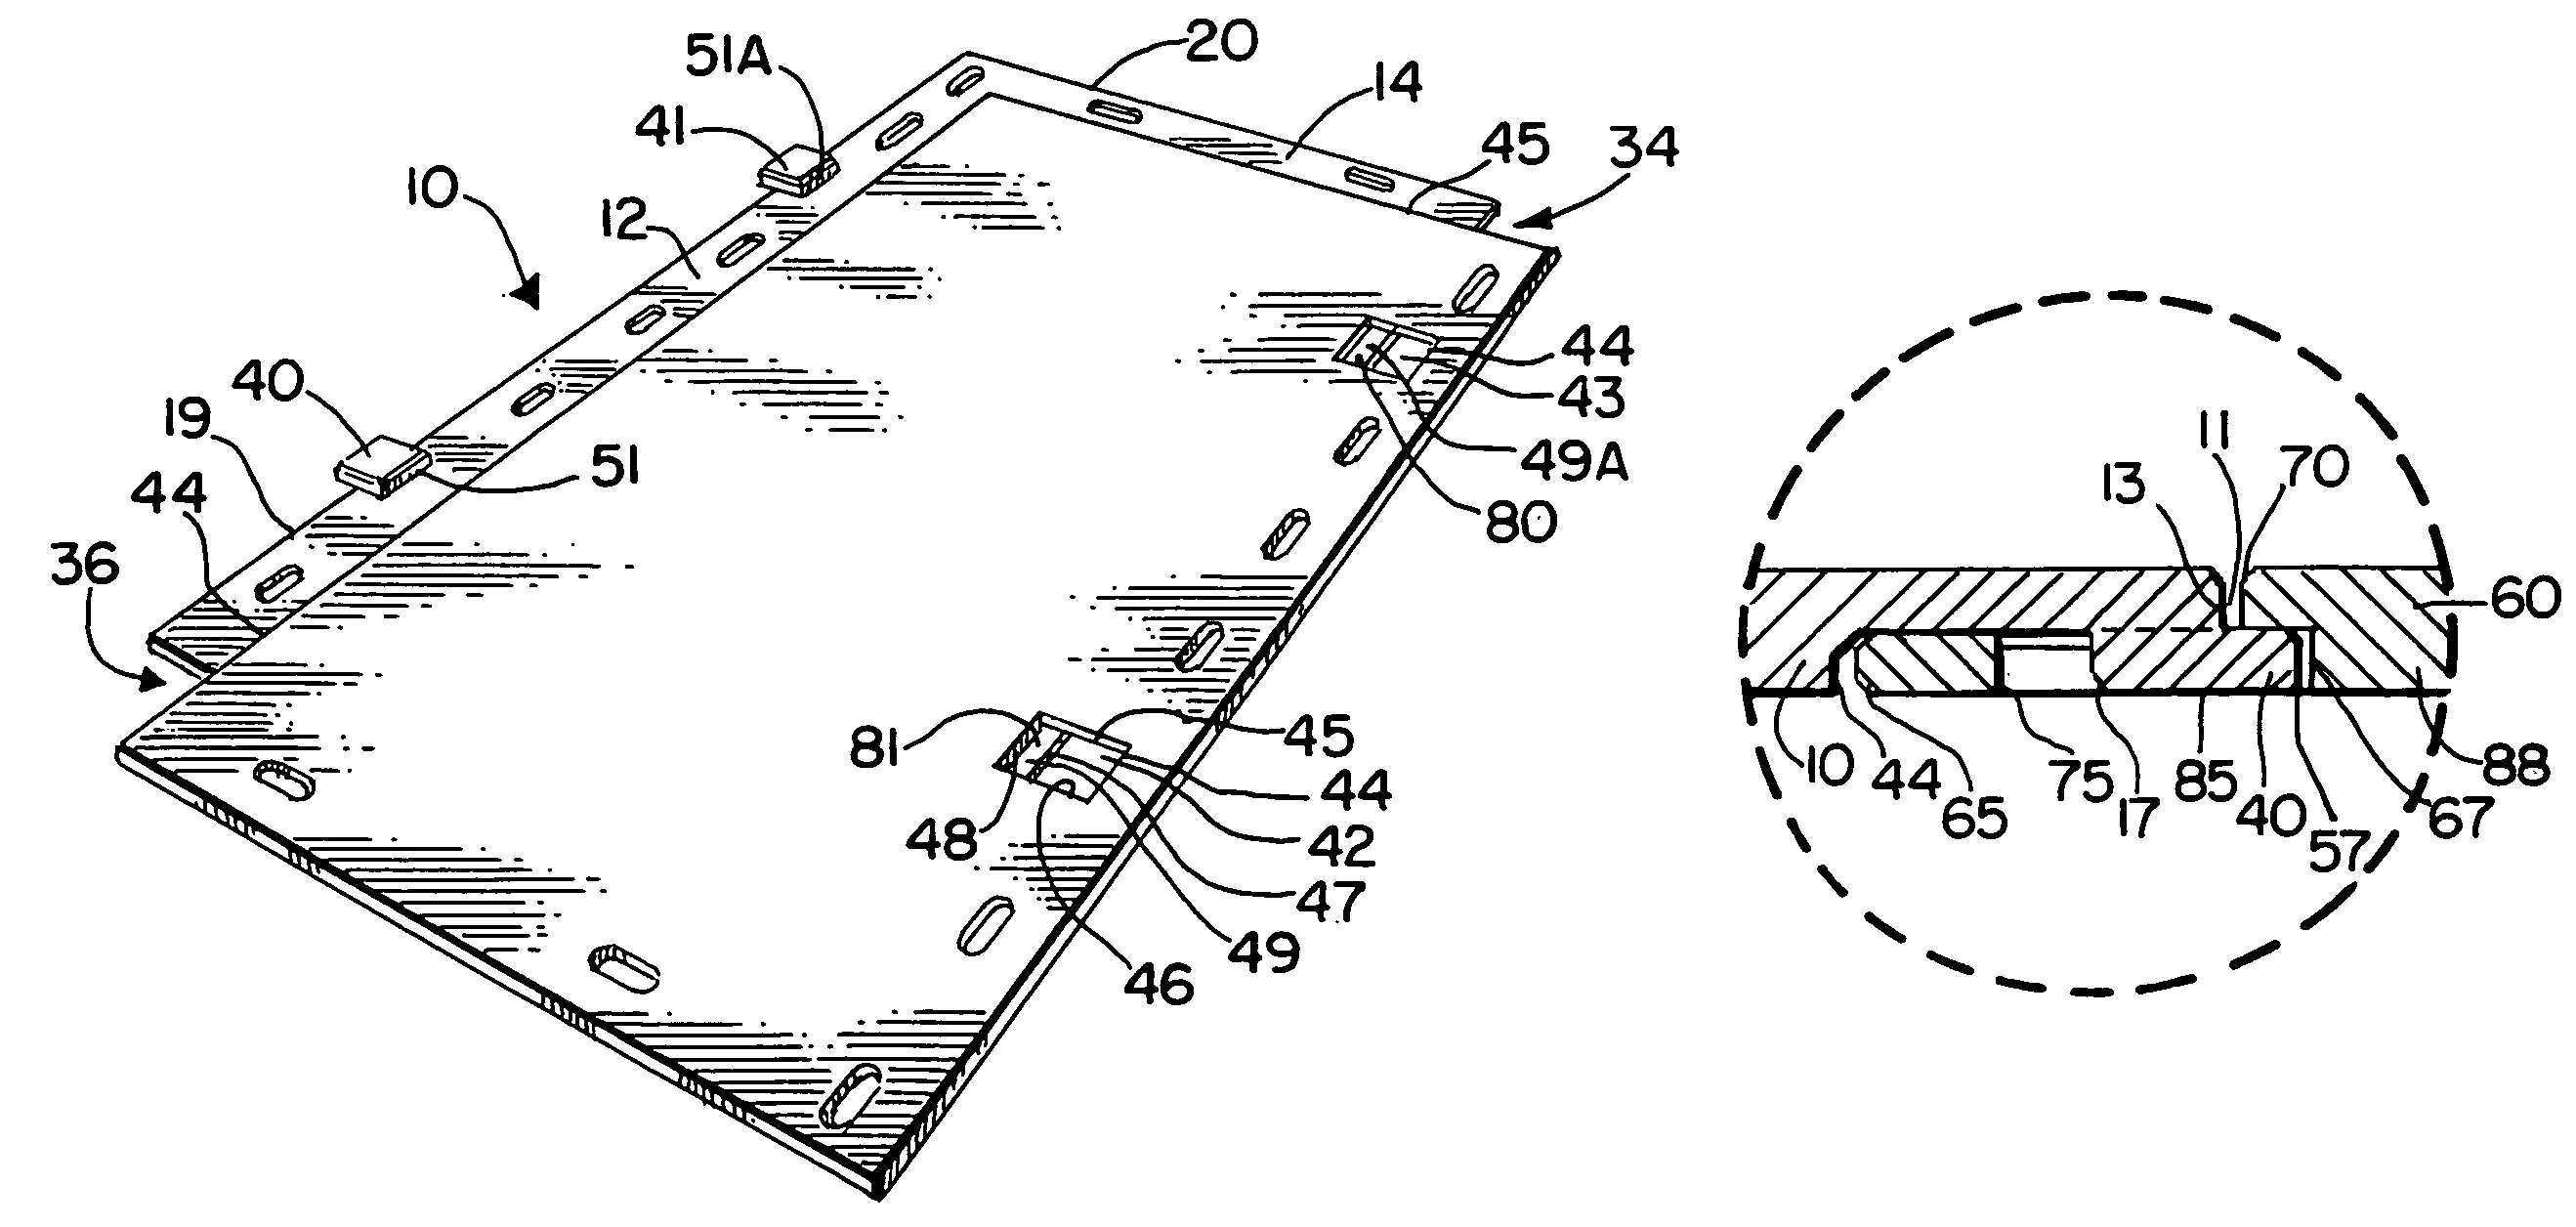 Overlapping secured mat system